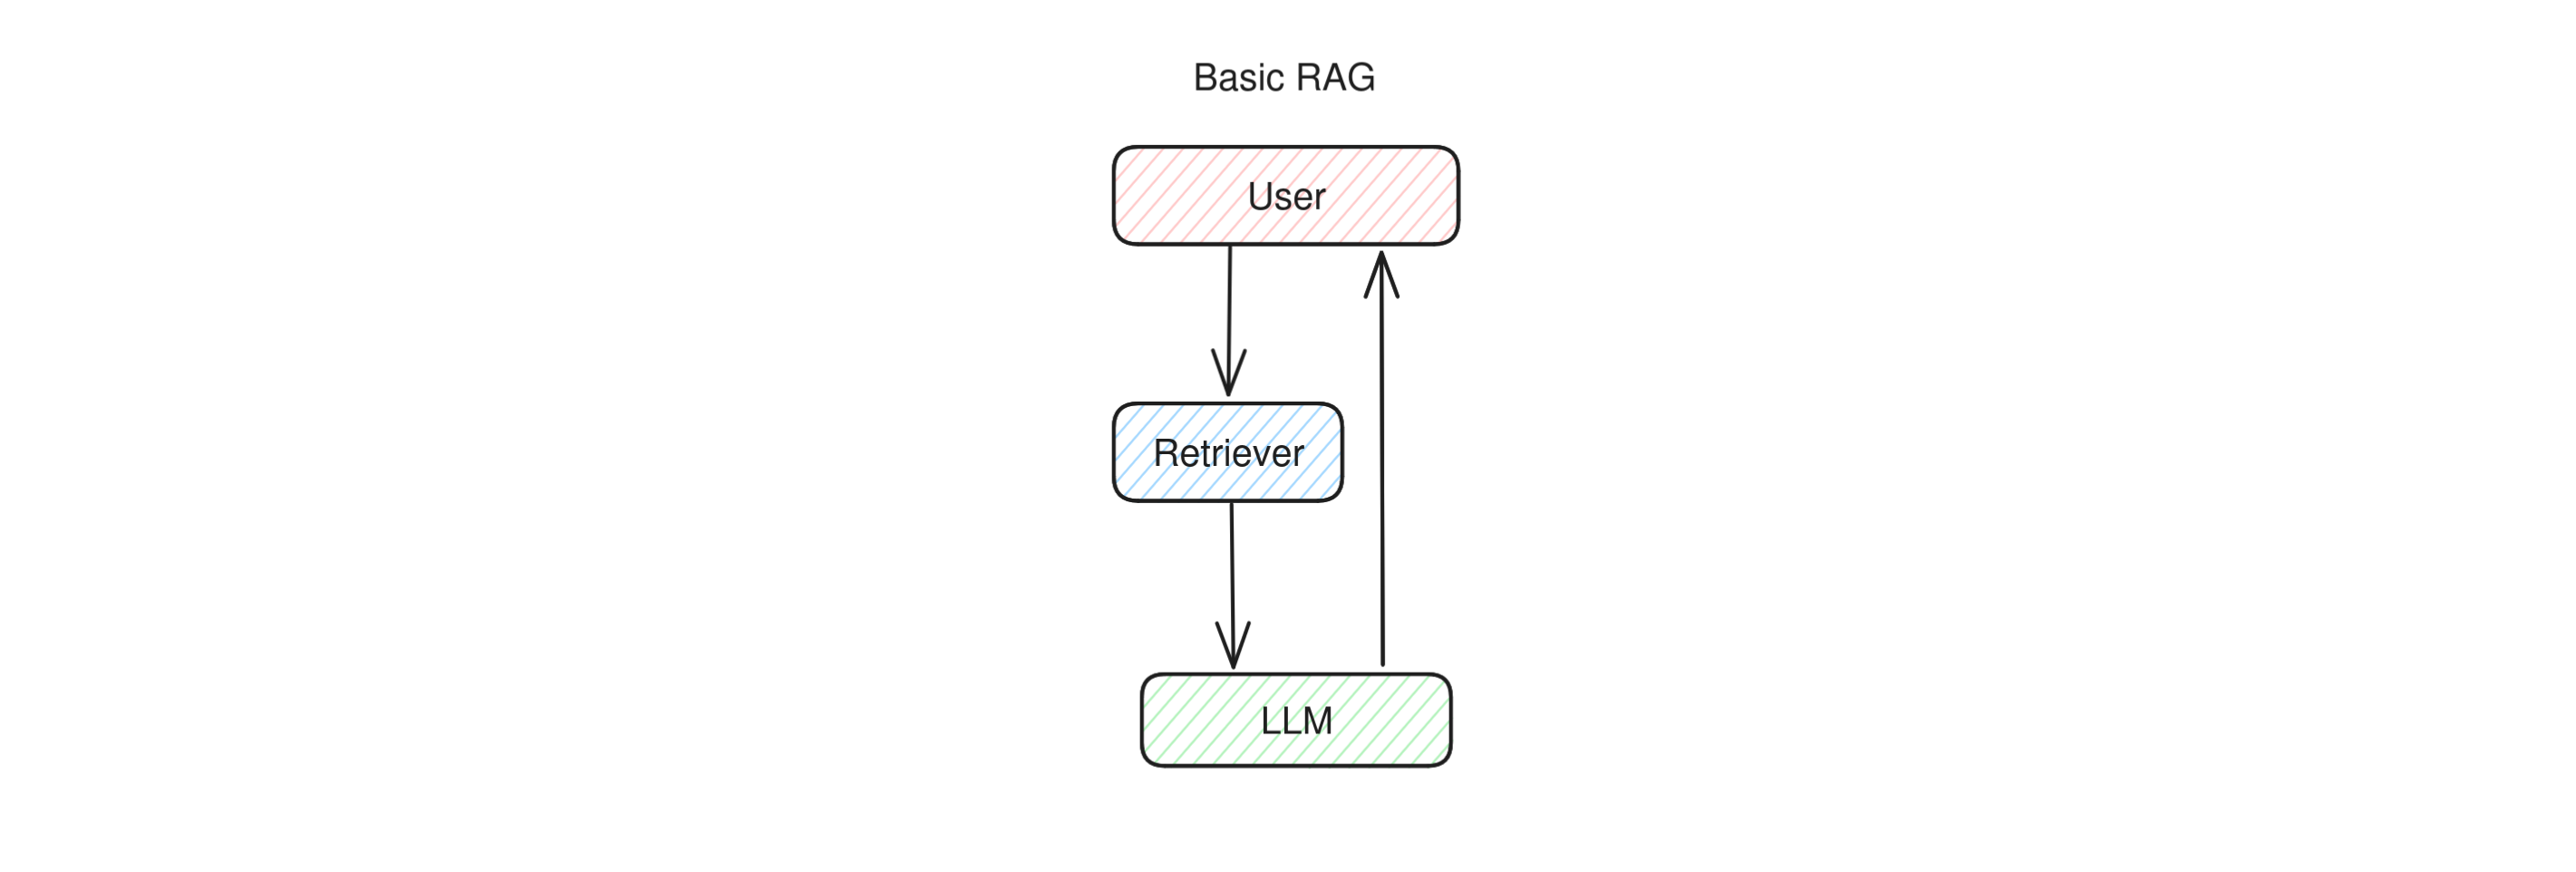 Diagram of the operation of a RAG app: first the user question is sent to a retriever system, which fetches some additional data relevant to the question. Then, the question and the additional data is sent to the LLM to formulate an answer.